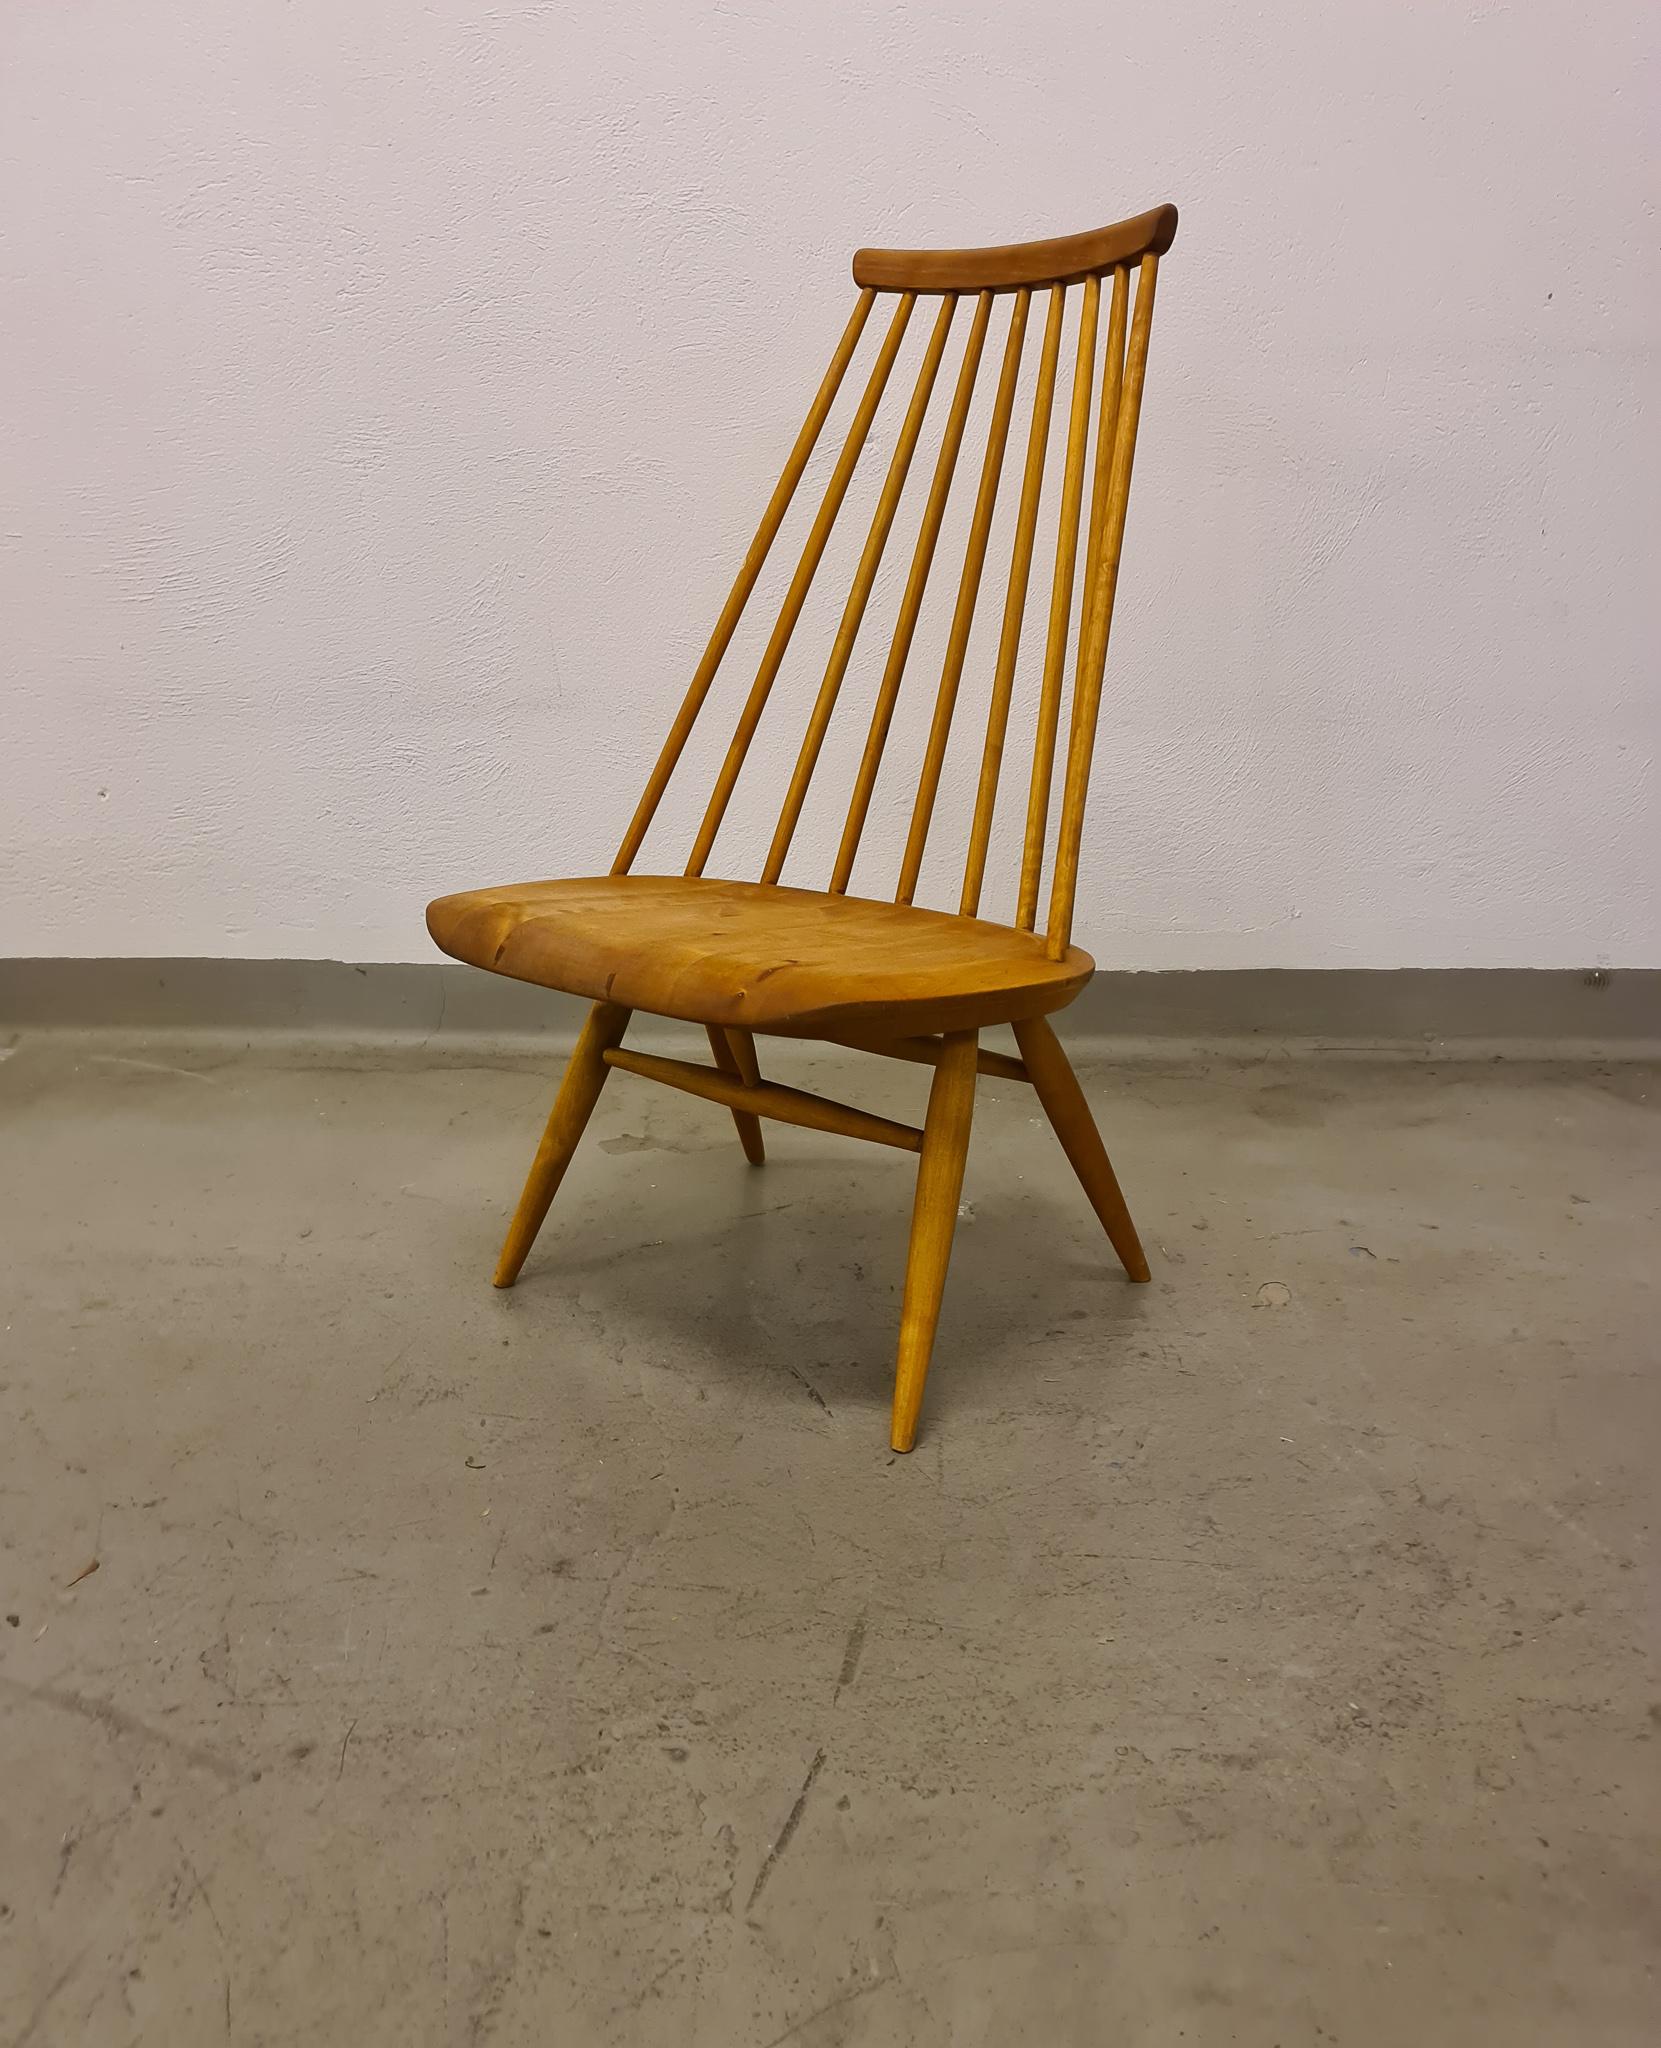 This Iconic 'Mademoiselle' chair designed by Illmari Tapiovaara for Edsby-verken, Sweden, with unique bentwood seats and curved backrest, original solid birch which is unusual. Labeled to the underside. This is the original made at Edsbyverken in